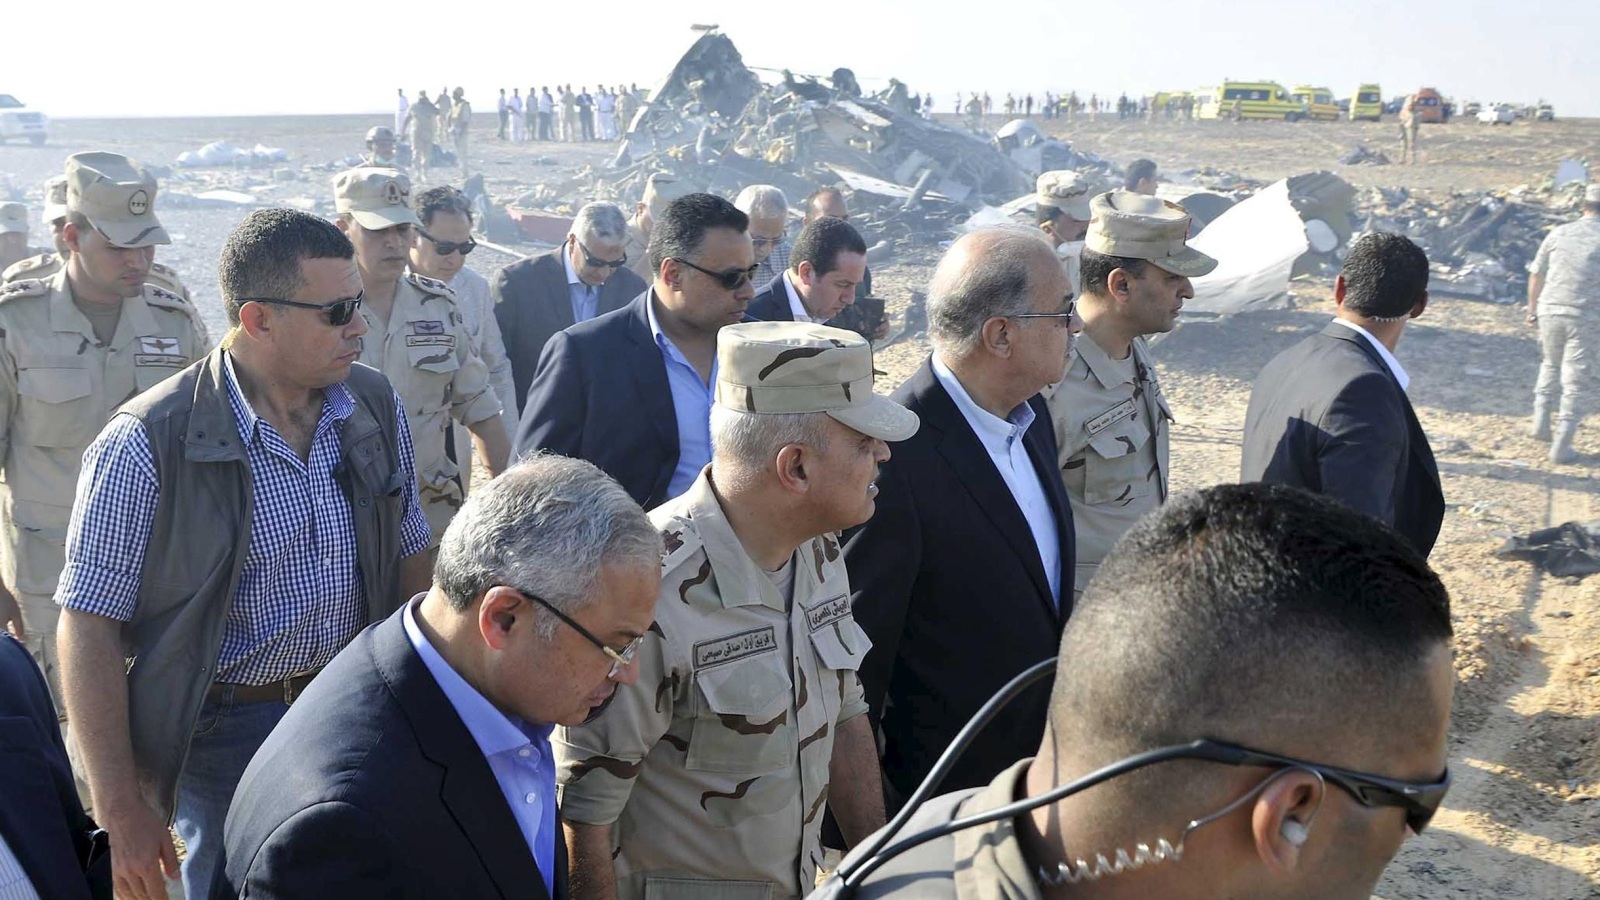 Egypt's Prime Minister Sherif Ismail (C) and Egypt's Defense Minister Sedki Sobhi (2nd L) walk at the site where a Russian airliner crashed in central Sinai near El Arish city, north Egypt, October 31, 2015. The Airbus A321, operated by Russian airline Kogalymavia under the brand name Metrojet, carrying 224 passengers crashed into a mountainous area of Egypt's Sinai peninsula on Saturday shortly after losing radar contact near cruising altitude, killing all aboard. REUTERS/Stringer